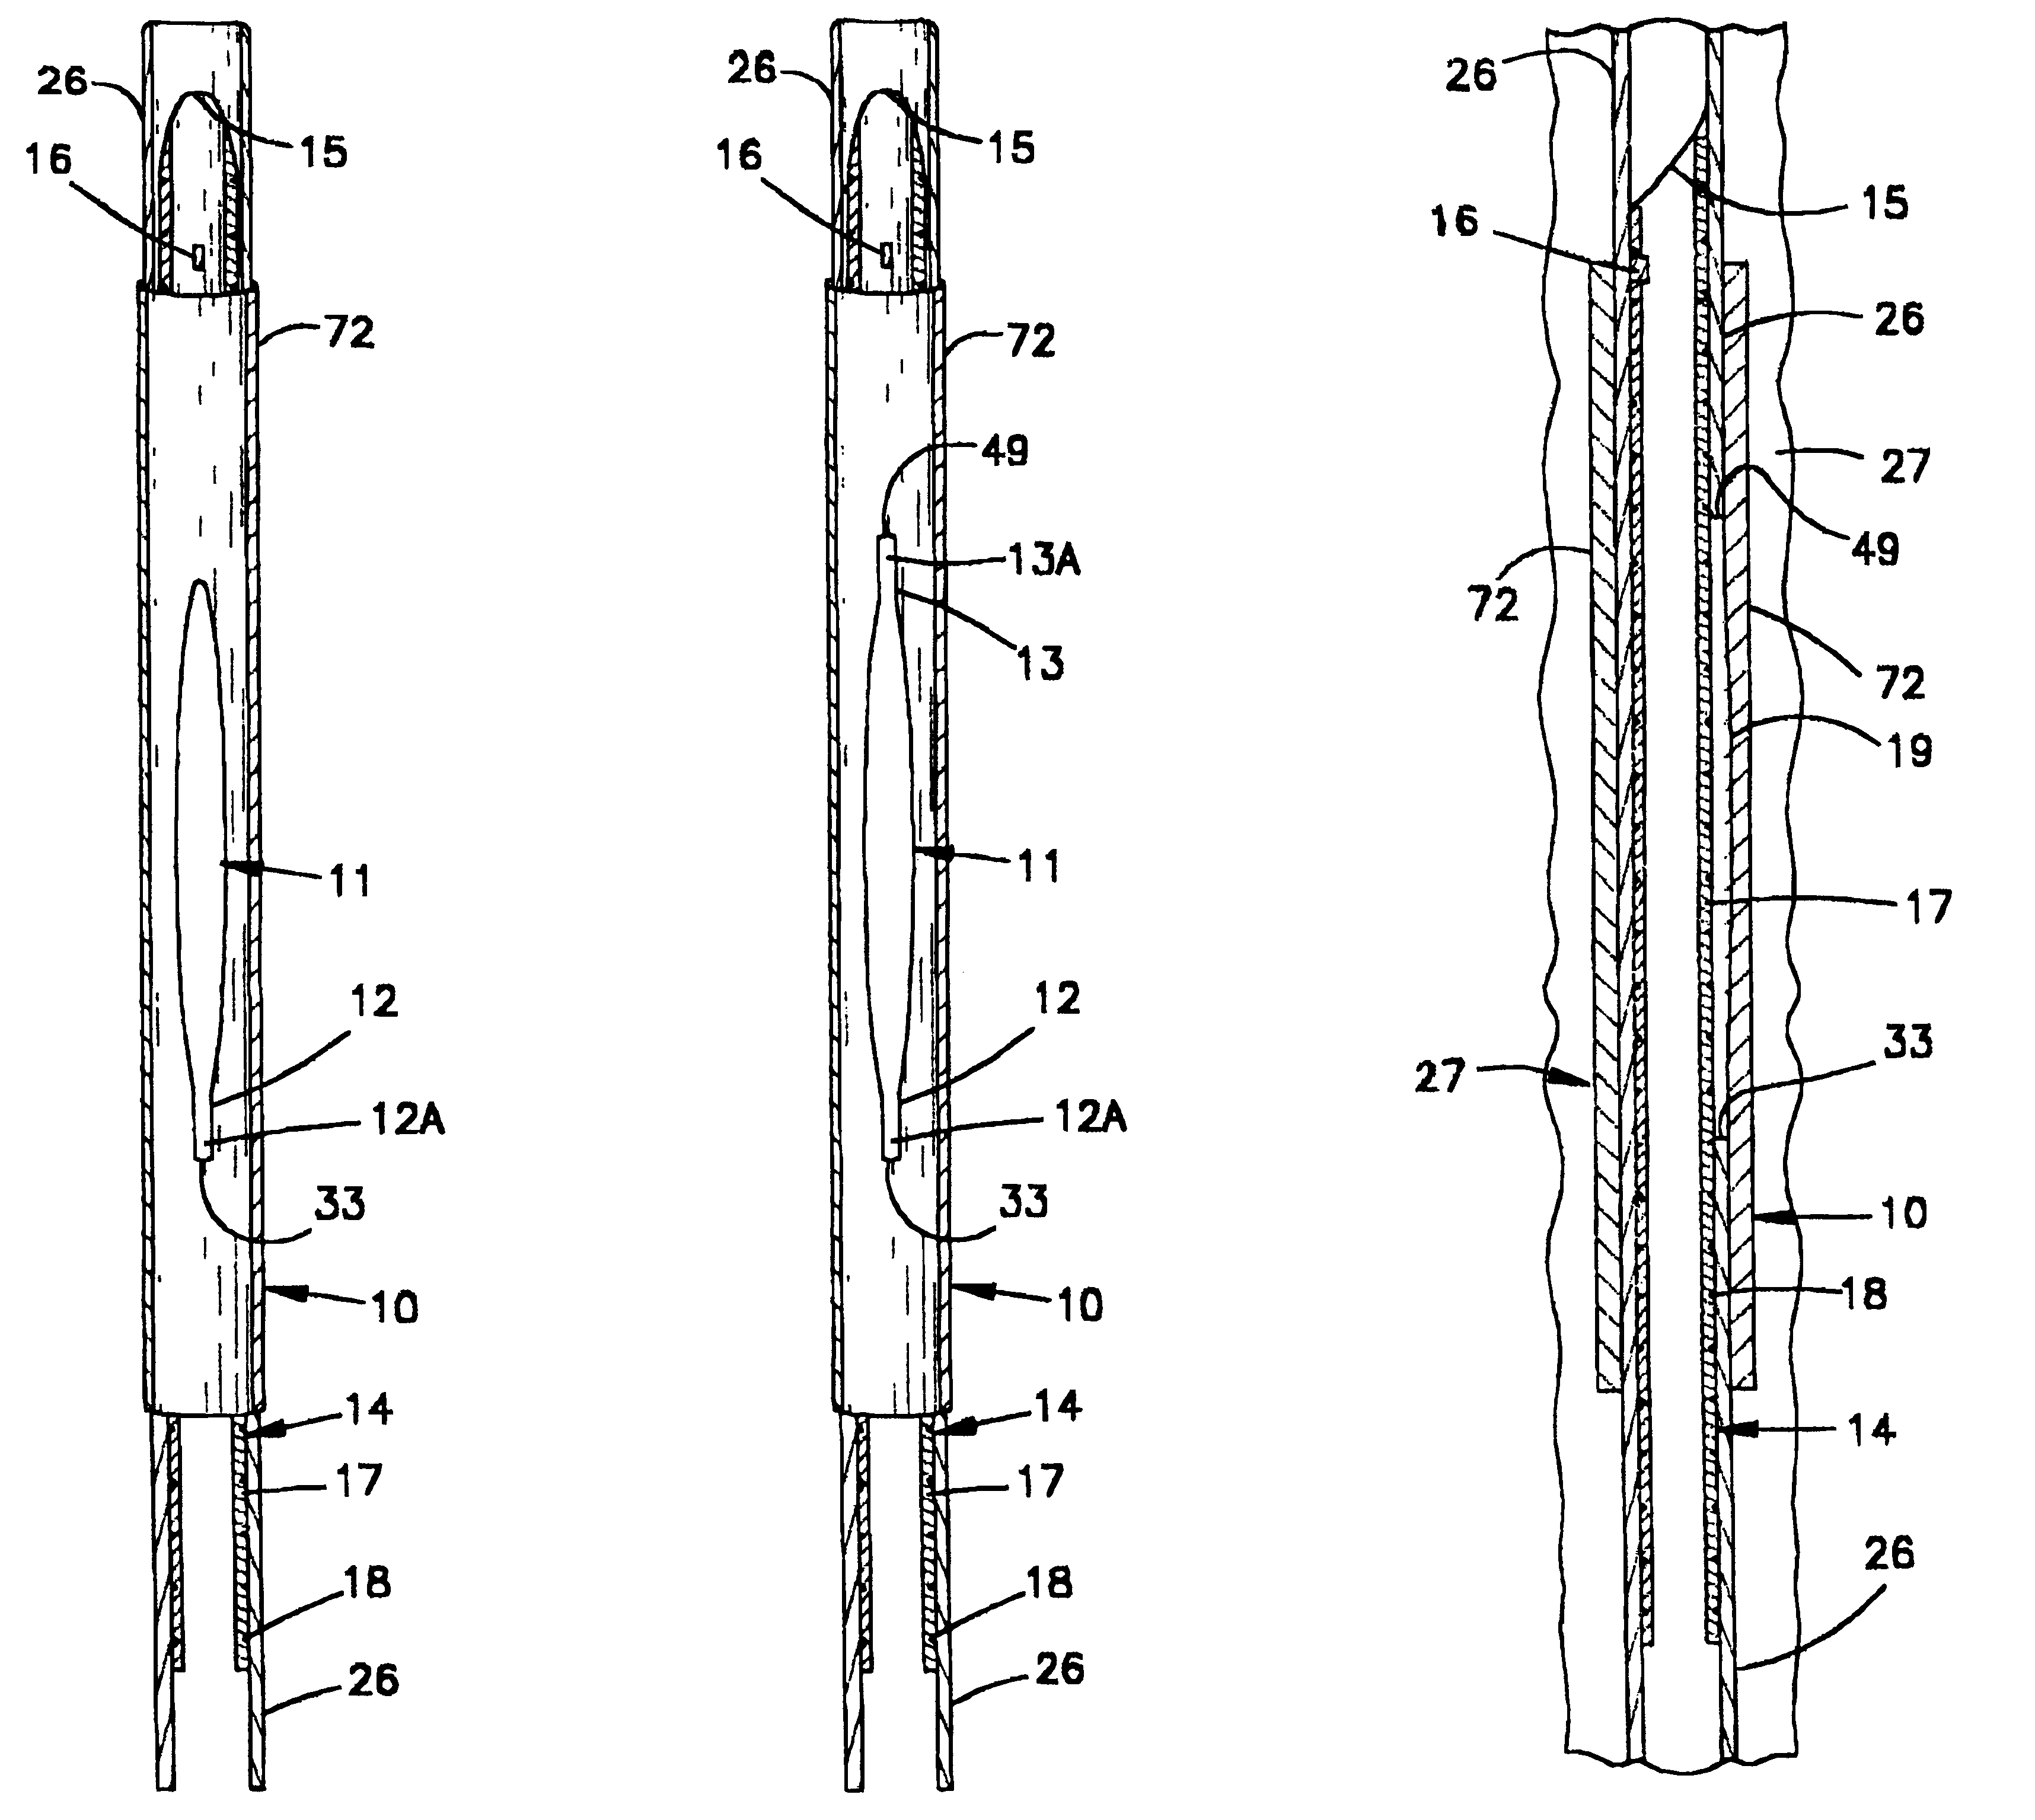 Assembly and method for providing a means of support and positioning for drilling multi-lateral wells and for reentry therein through a premilled window